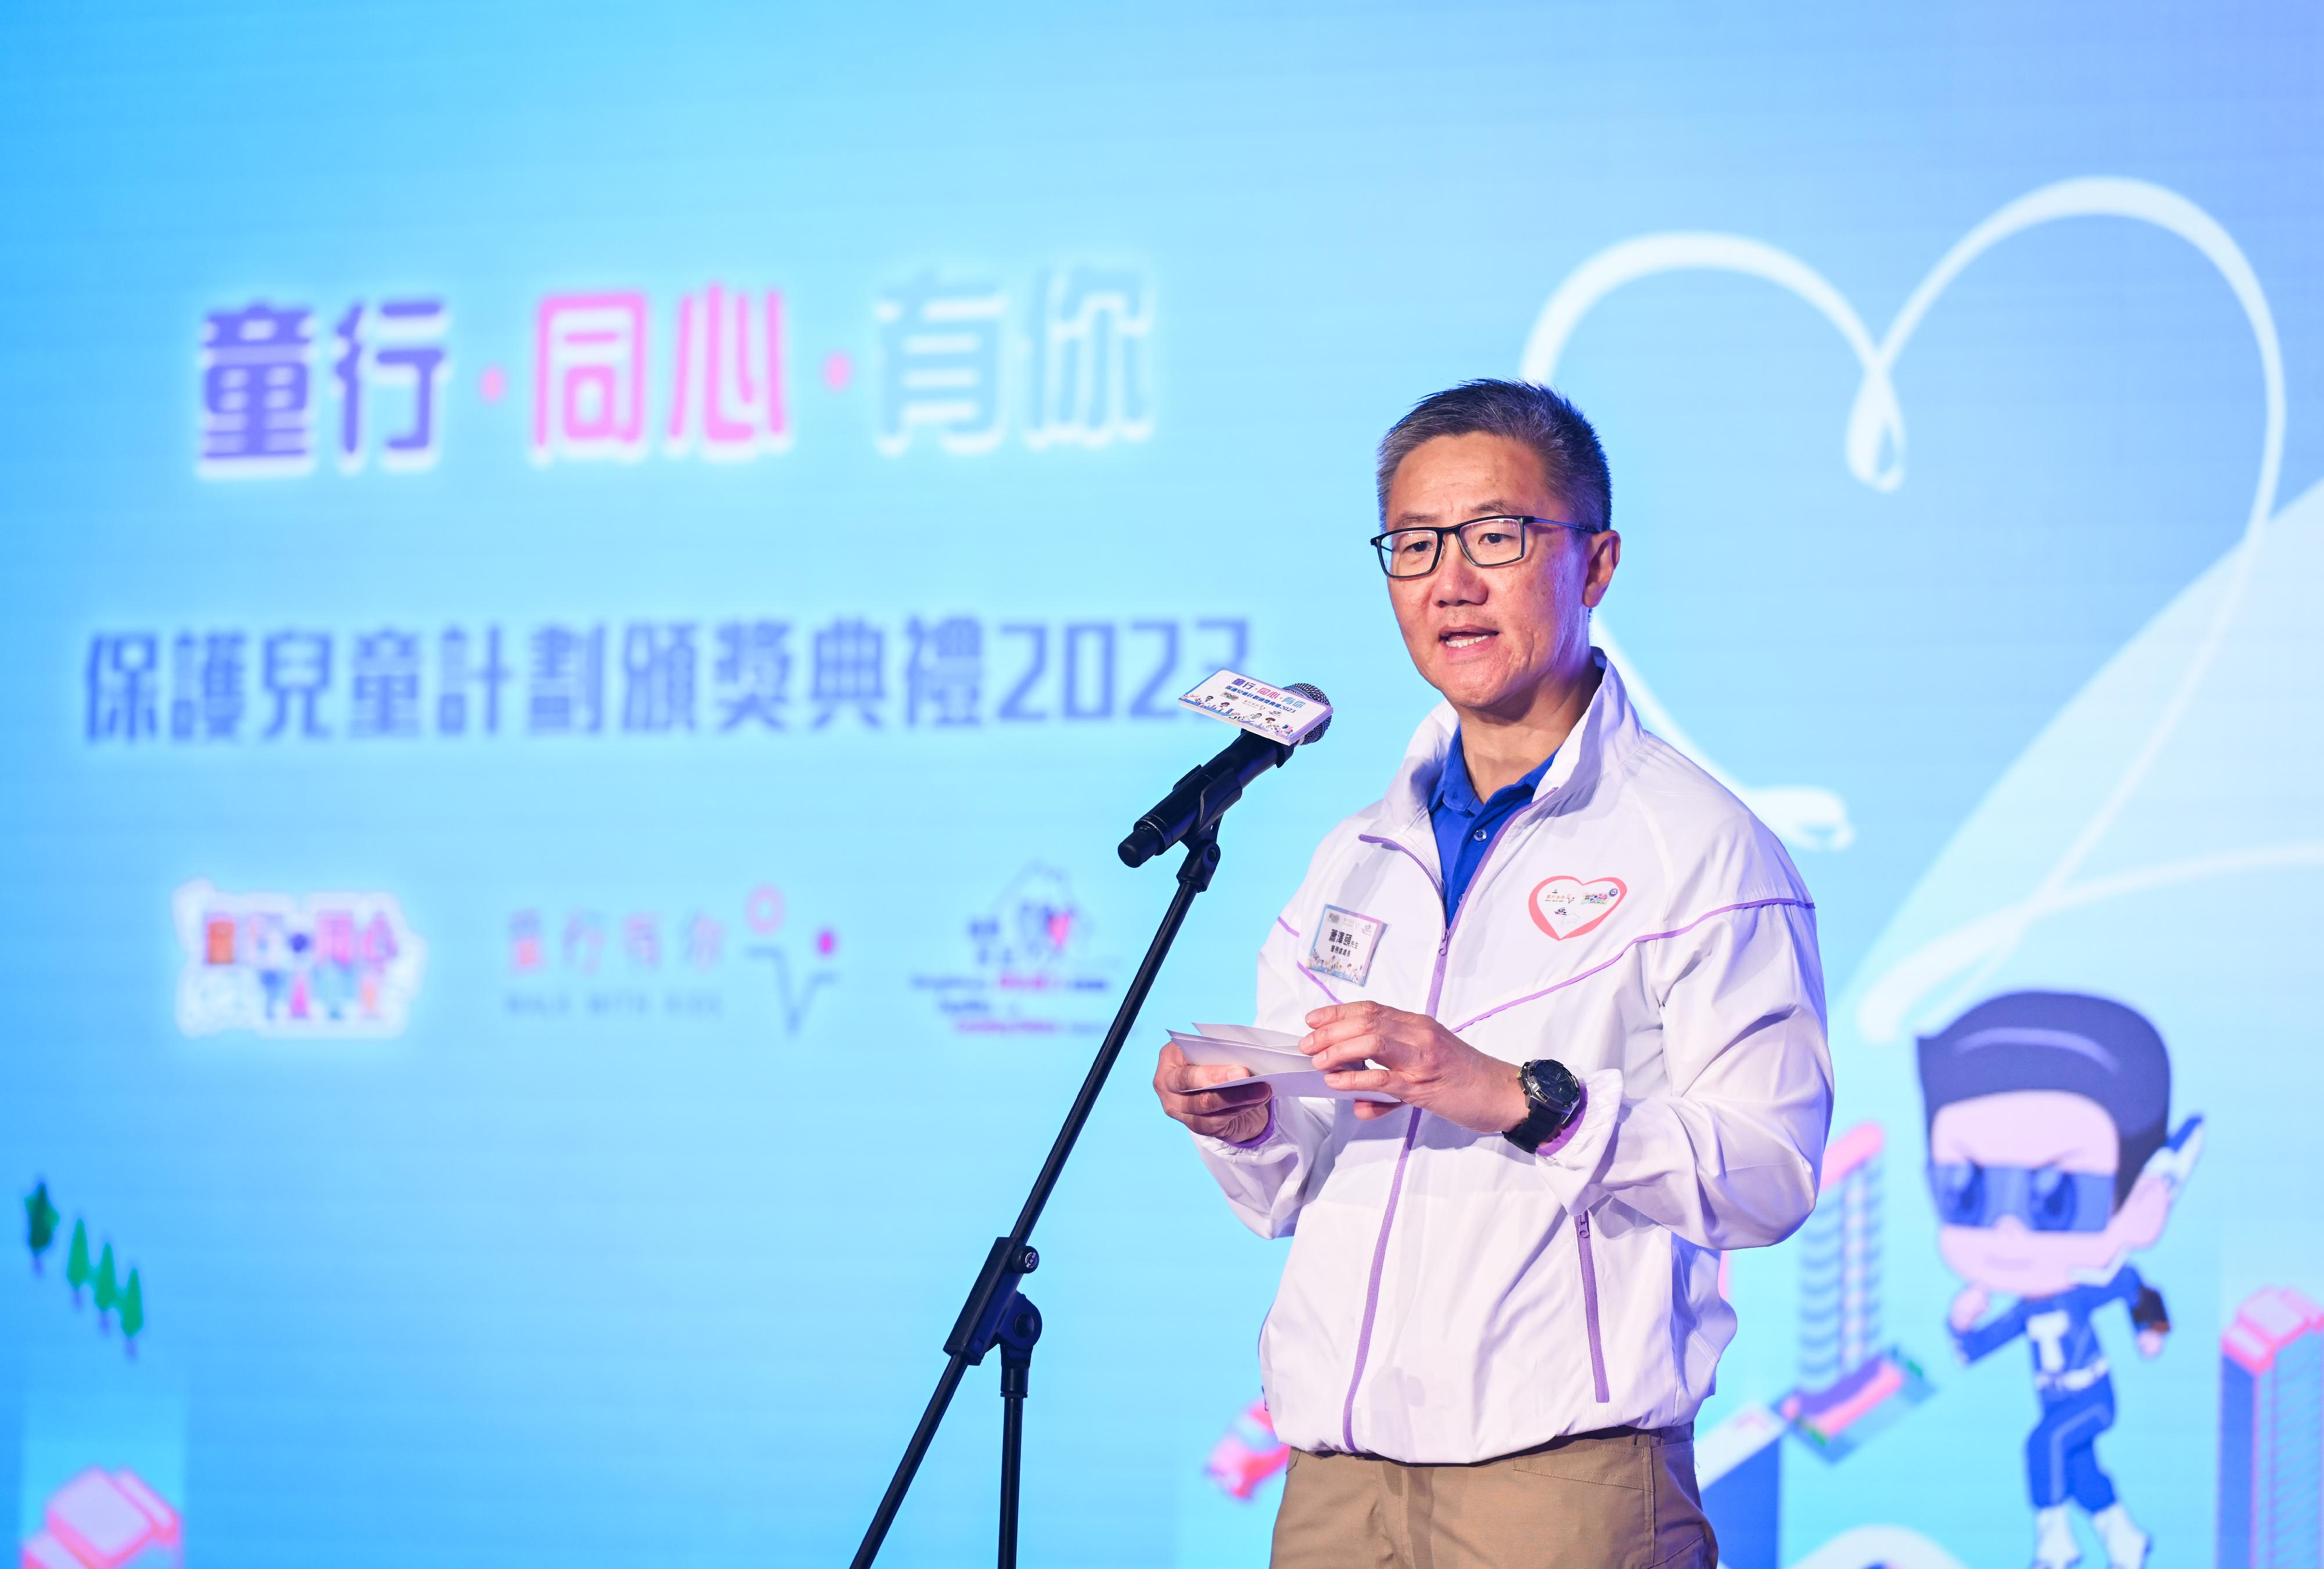 The Chief Secretary for Administration and Chairperson of the Commission on Children, Mr Chan Kwok-ki, today (November 18) officiated at the "Let's T.A.L.K. and Walk with Kids" Child Protection Campaign Award Presentation Ceremony 2023. Photo shows the Commissioner of Police, Mr Siu Chak-yee, summing up the achievements of the Child Protection Campaign.